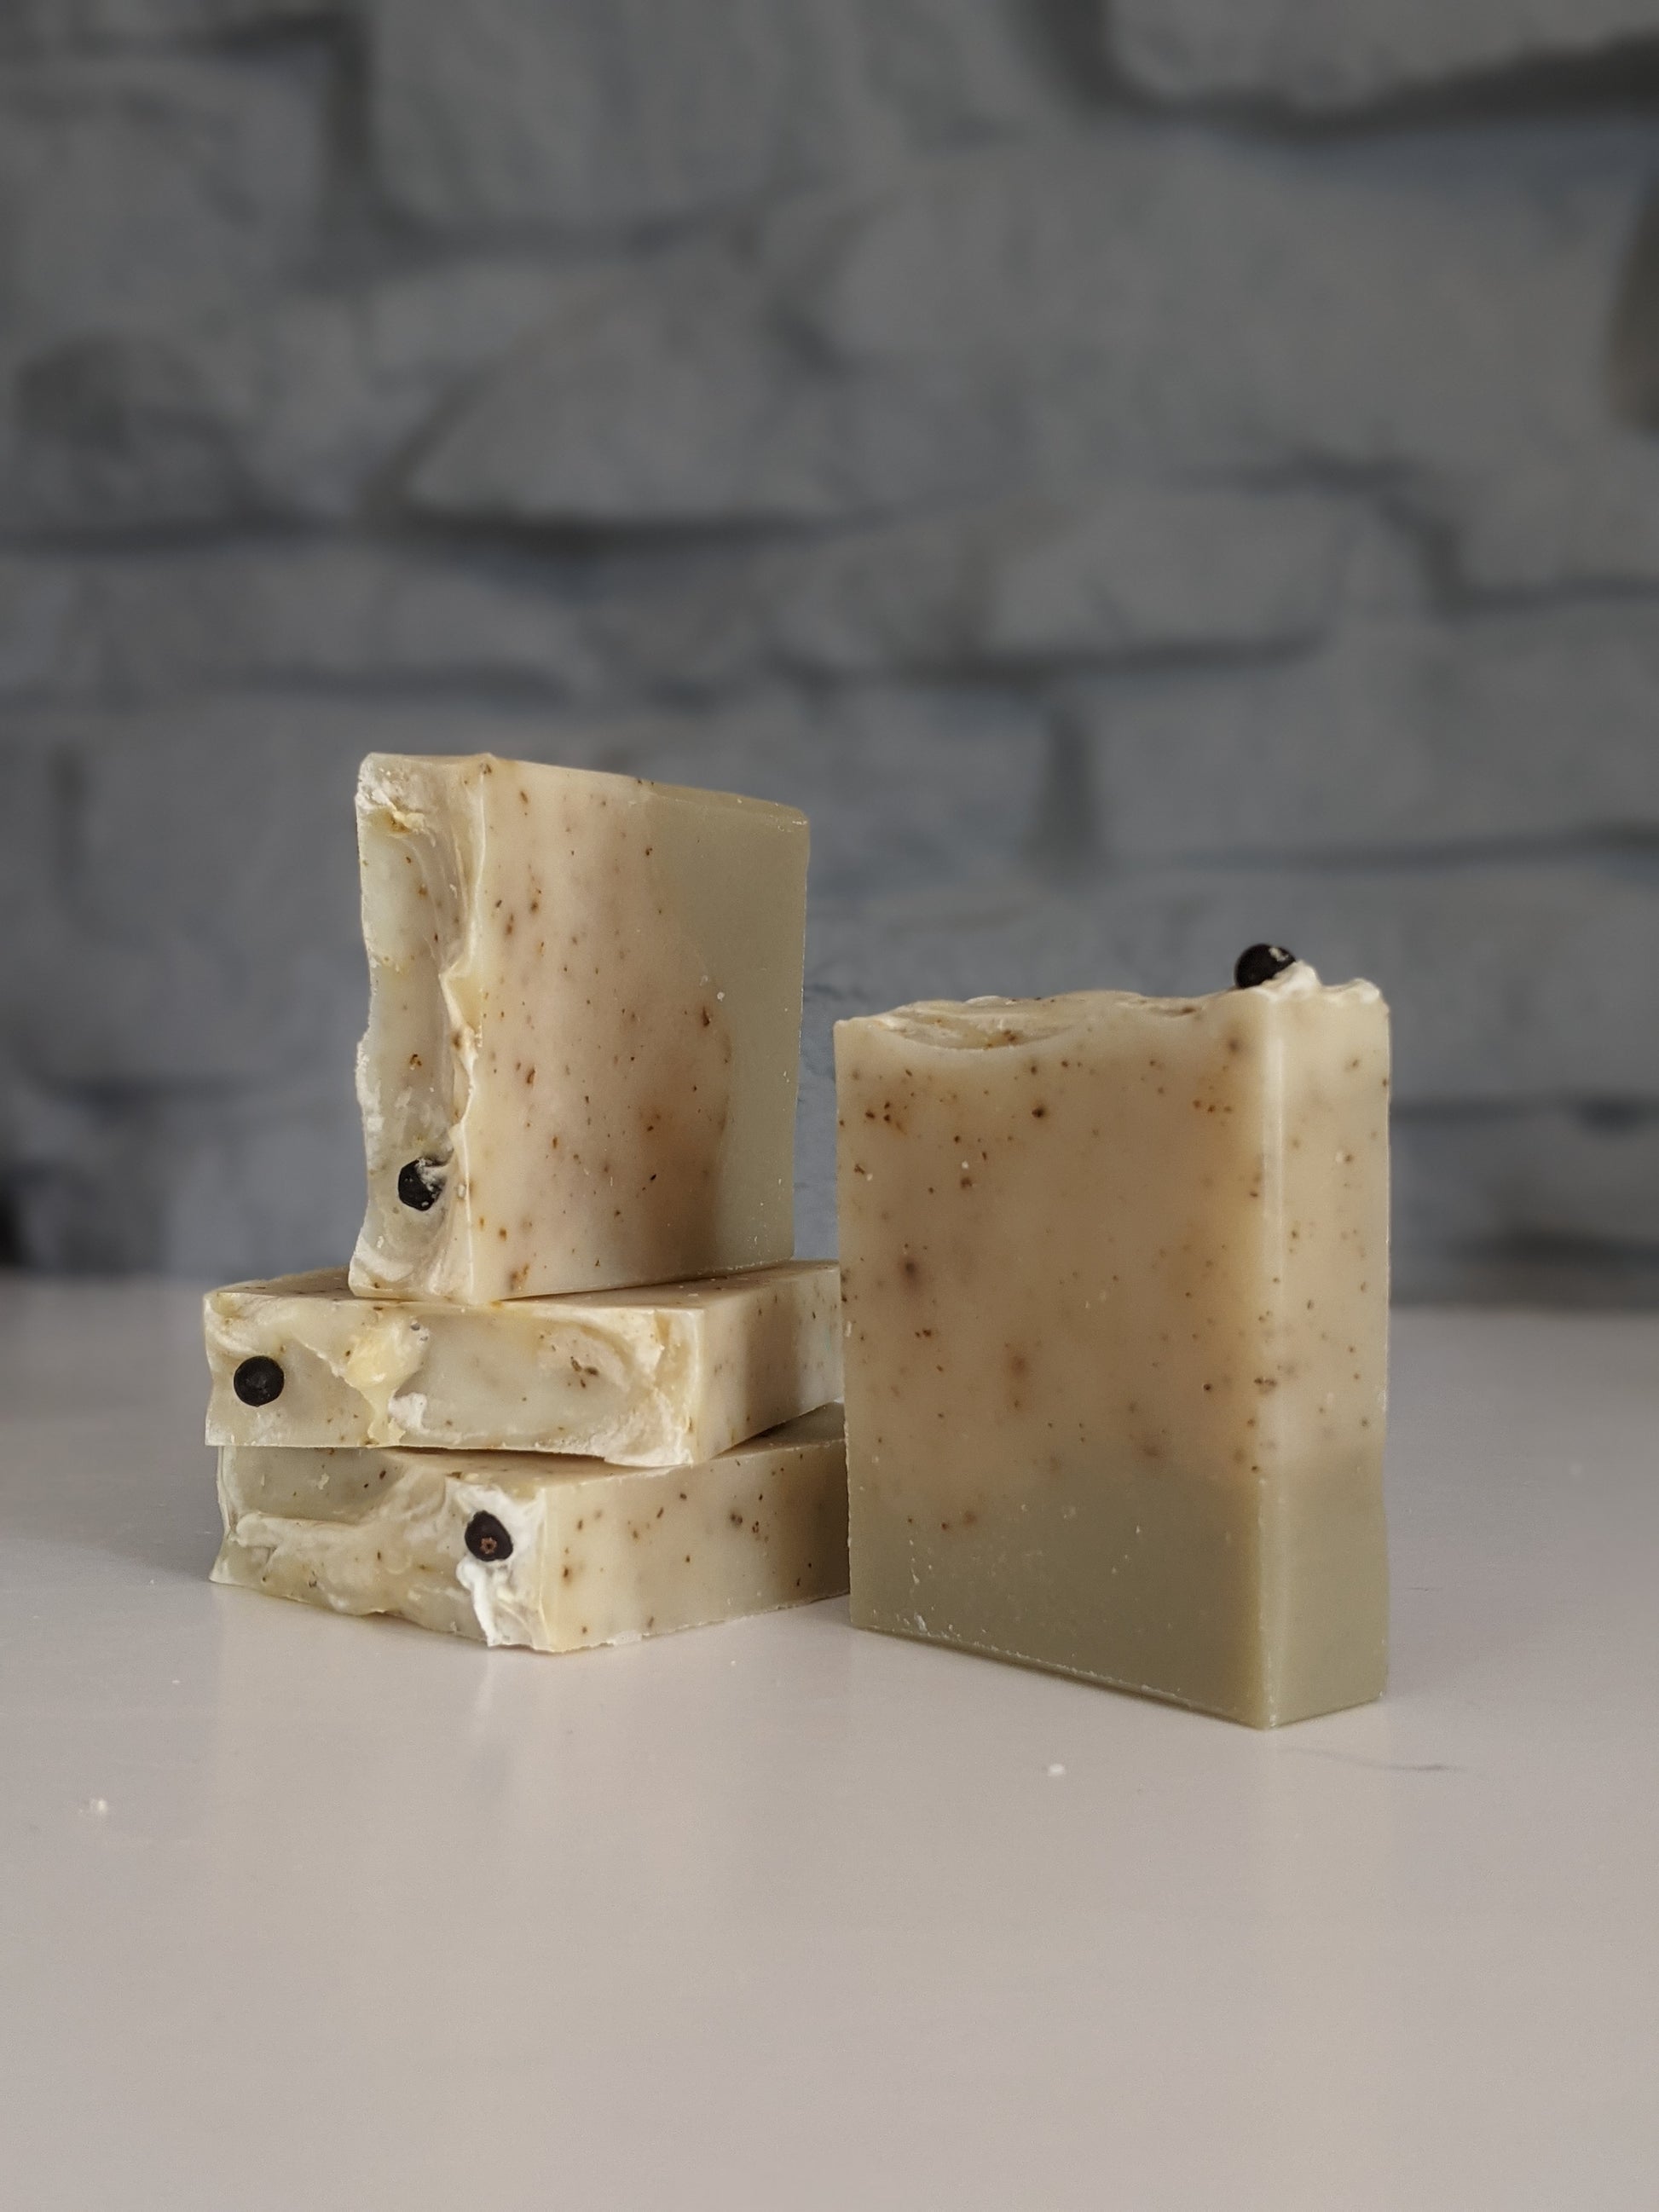 4 herb garden soaps arranged on a white surface against a light grey brick background. 